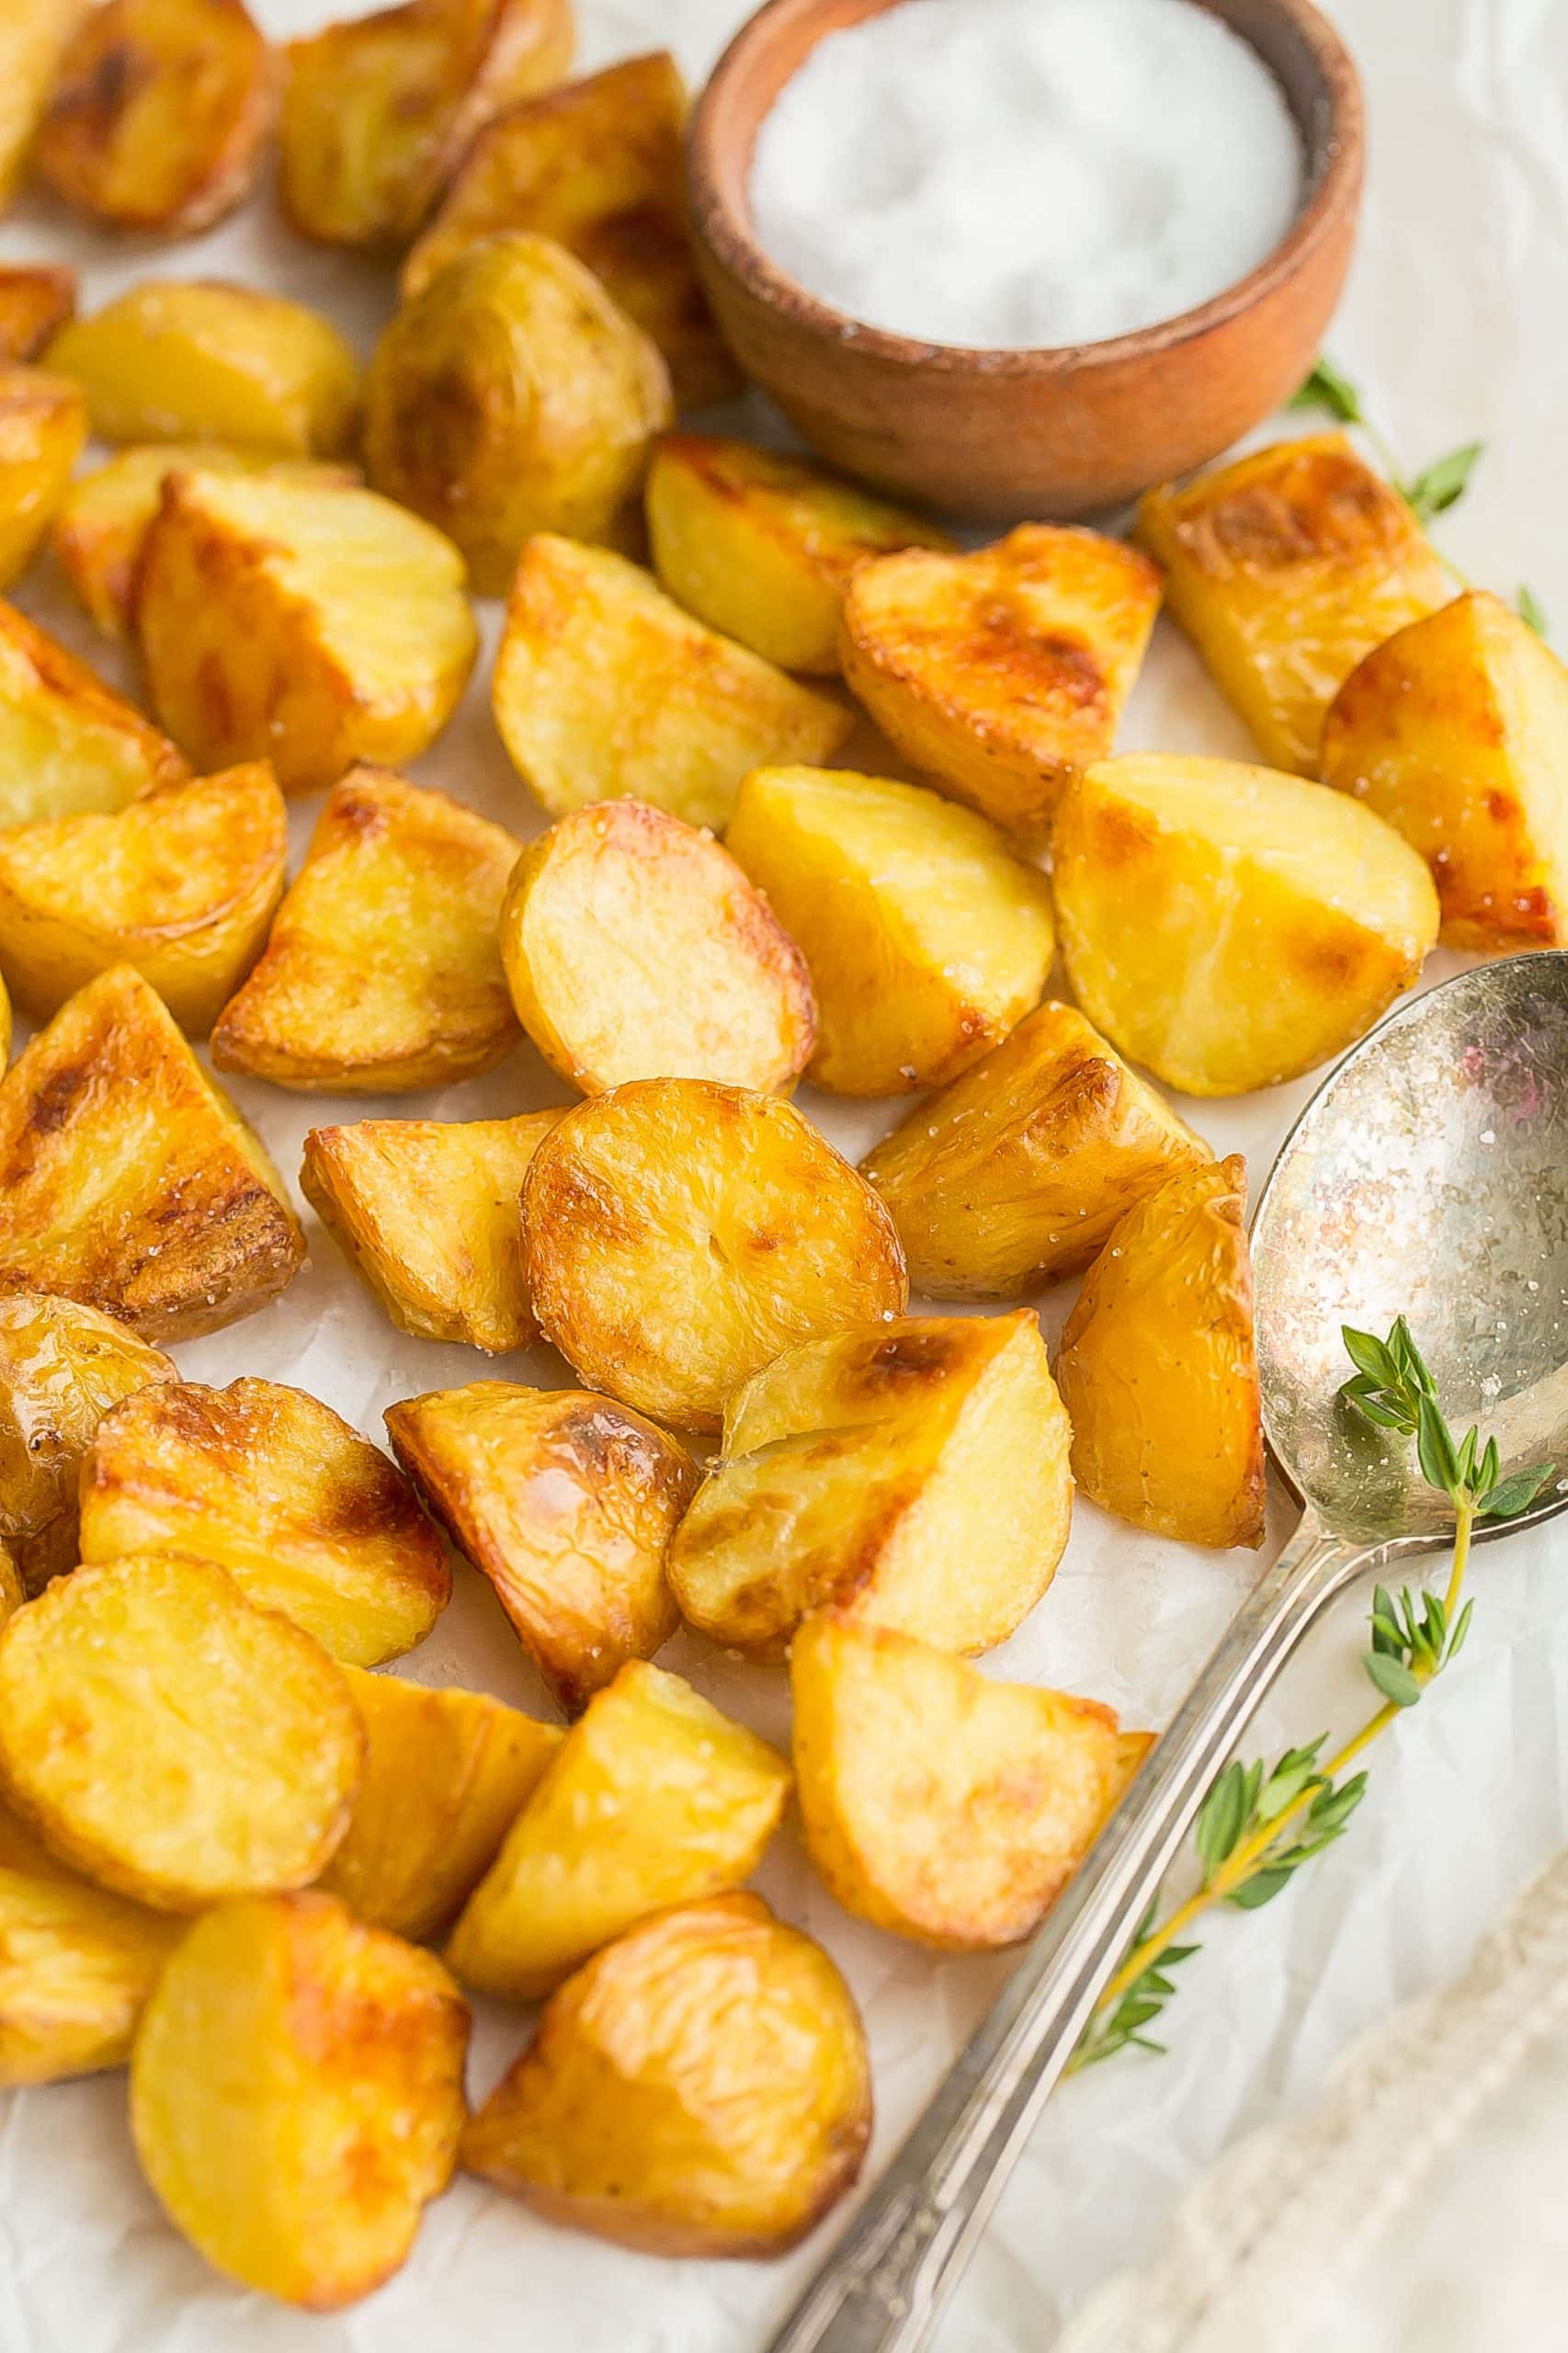 Potatoes with a serving spoon.